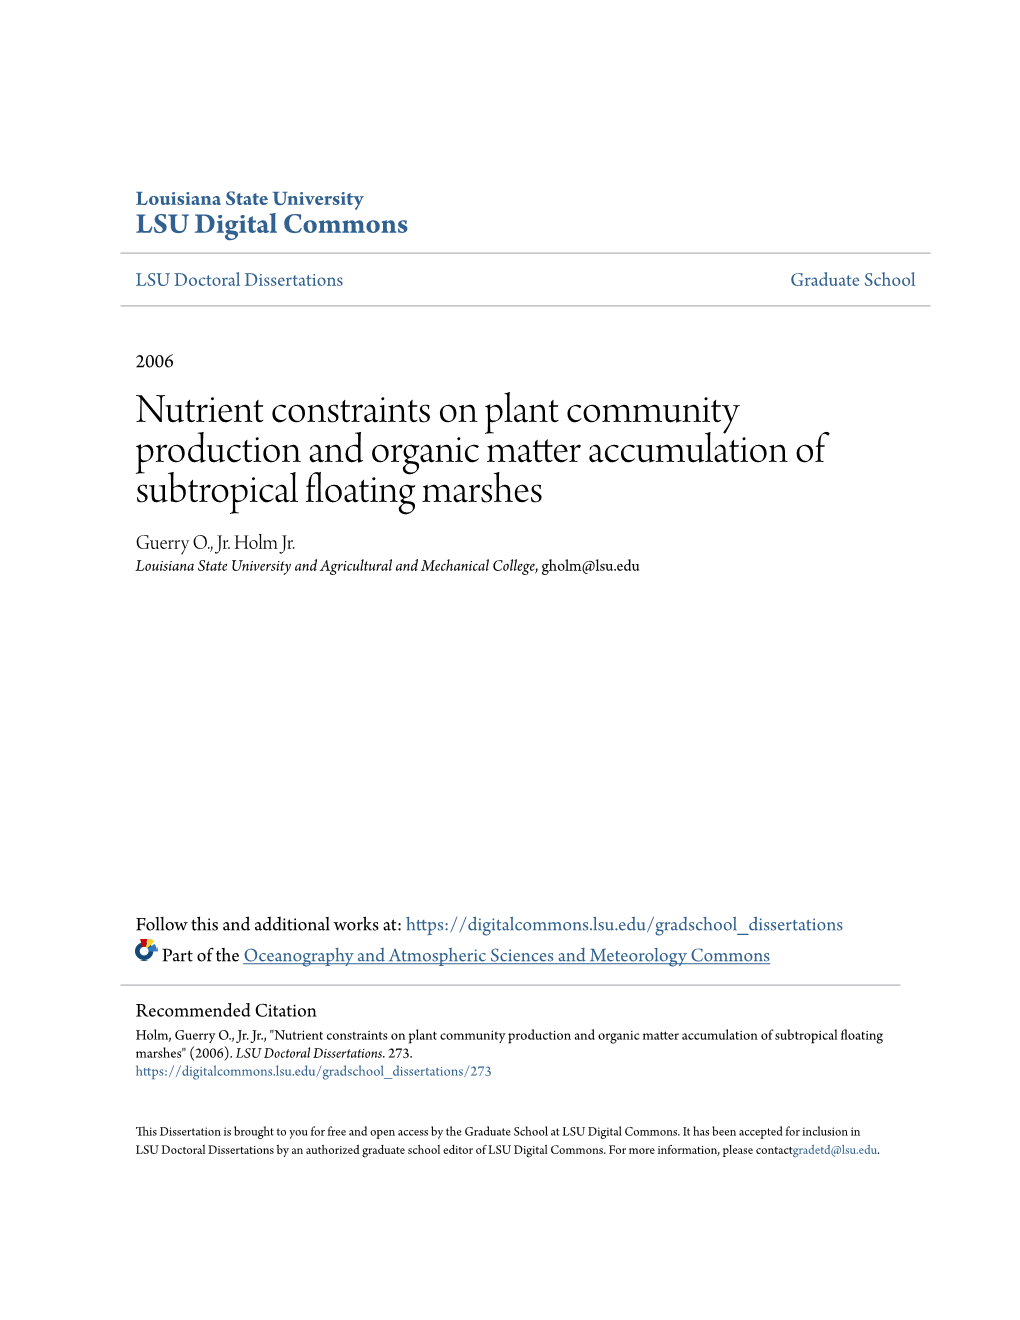 Nutrient Constraints on Plant Community Production and Organic Matter Accumulation of Subtropical Floating Marshes Guerry O., Jr